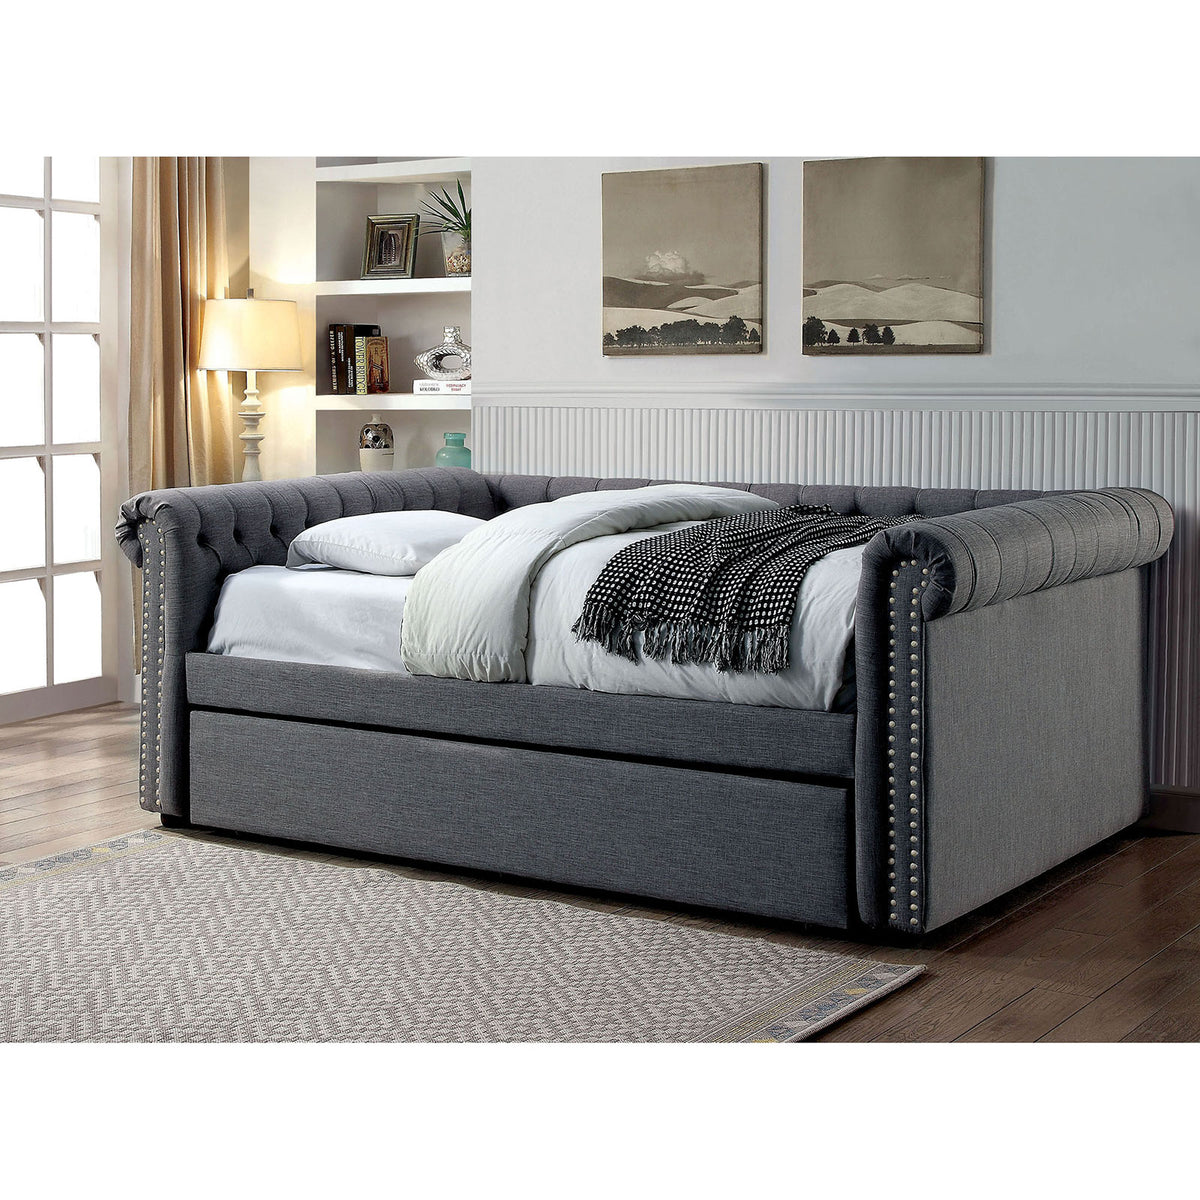 LEANNA Gray Full Daybed w/ Trundle, Gray LEANNA Gray Full Daybed w/ Trundle, Gray Half Price Furniture